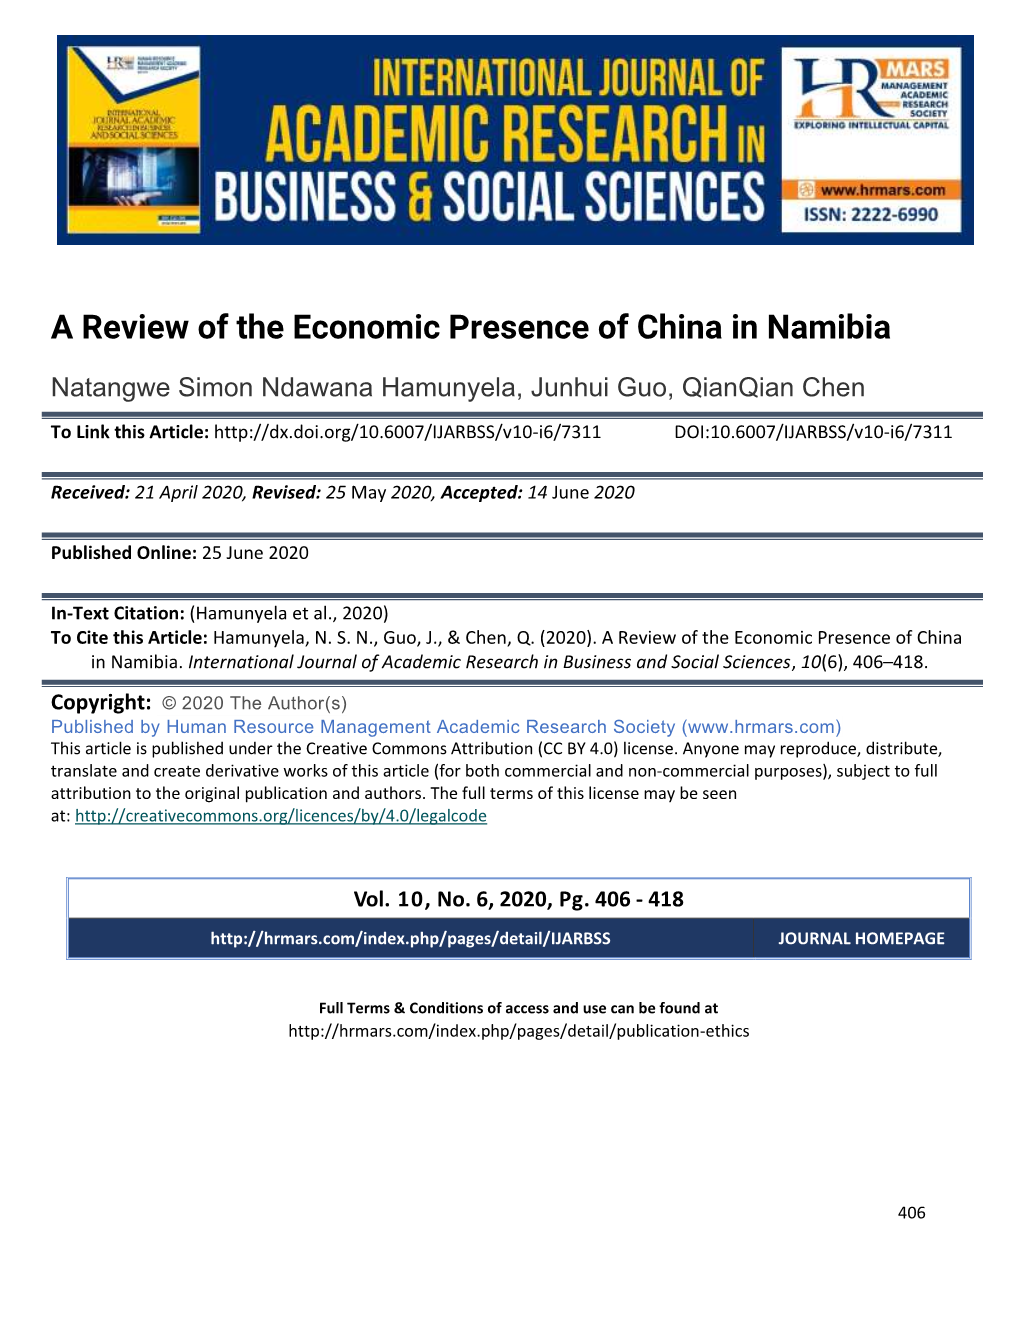 A Review of the Economic Presence of China in Namibia